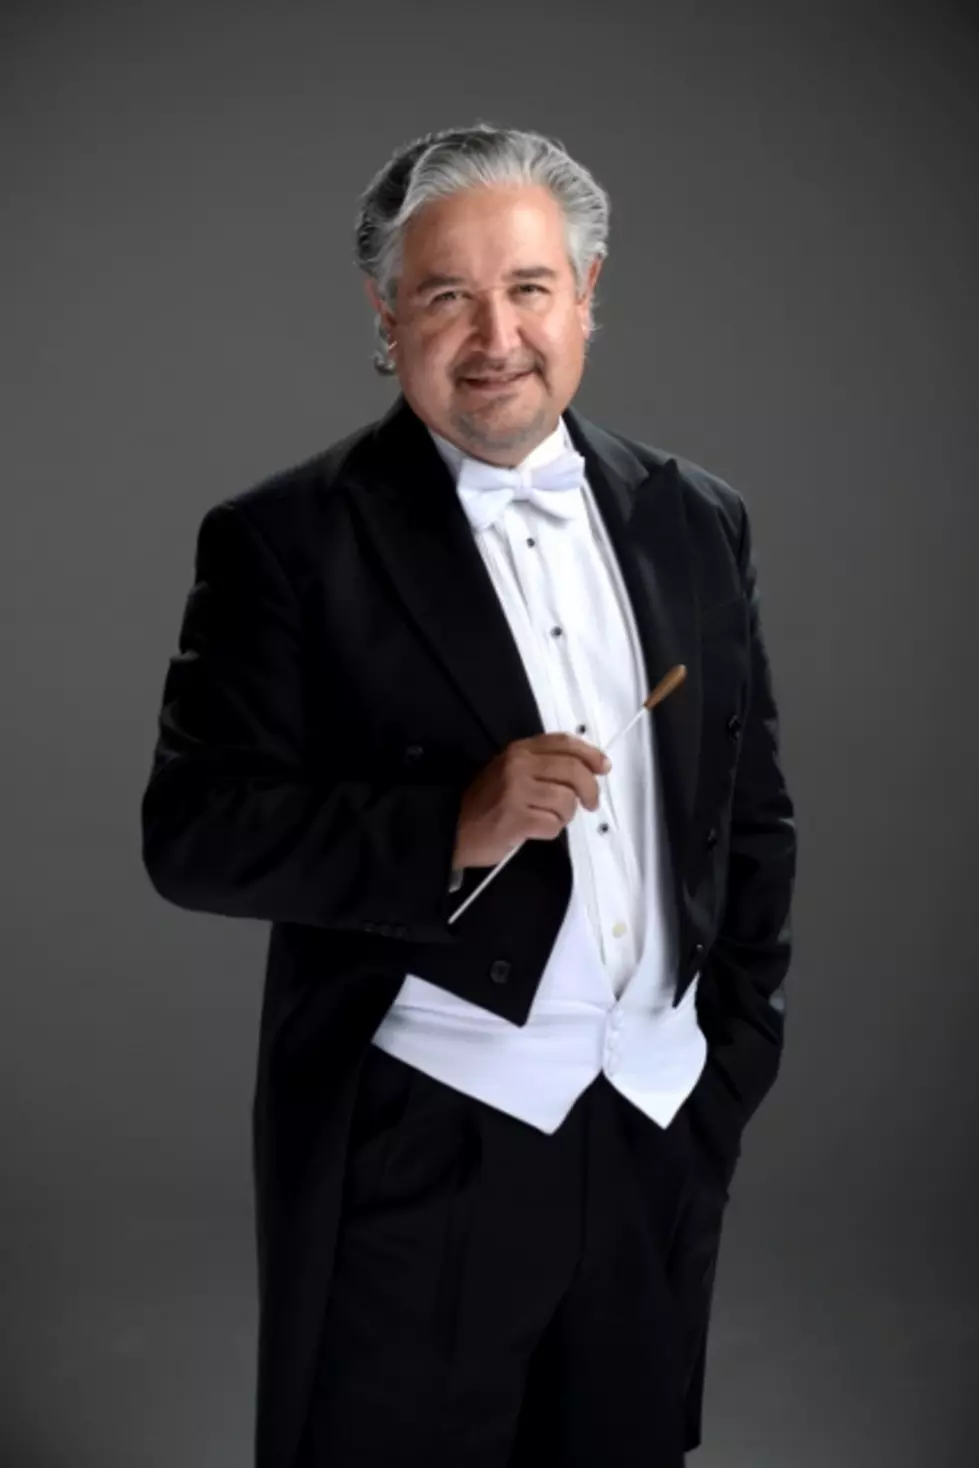 San Angelo Symphony/Orchestra Presents First Concert of 2016